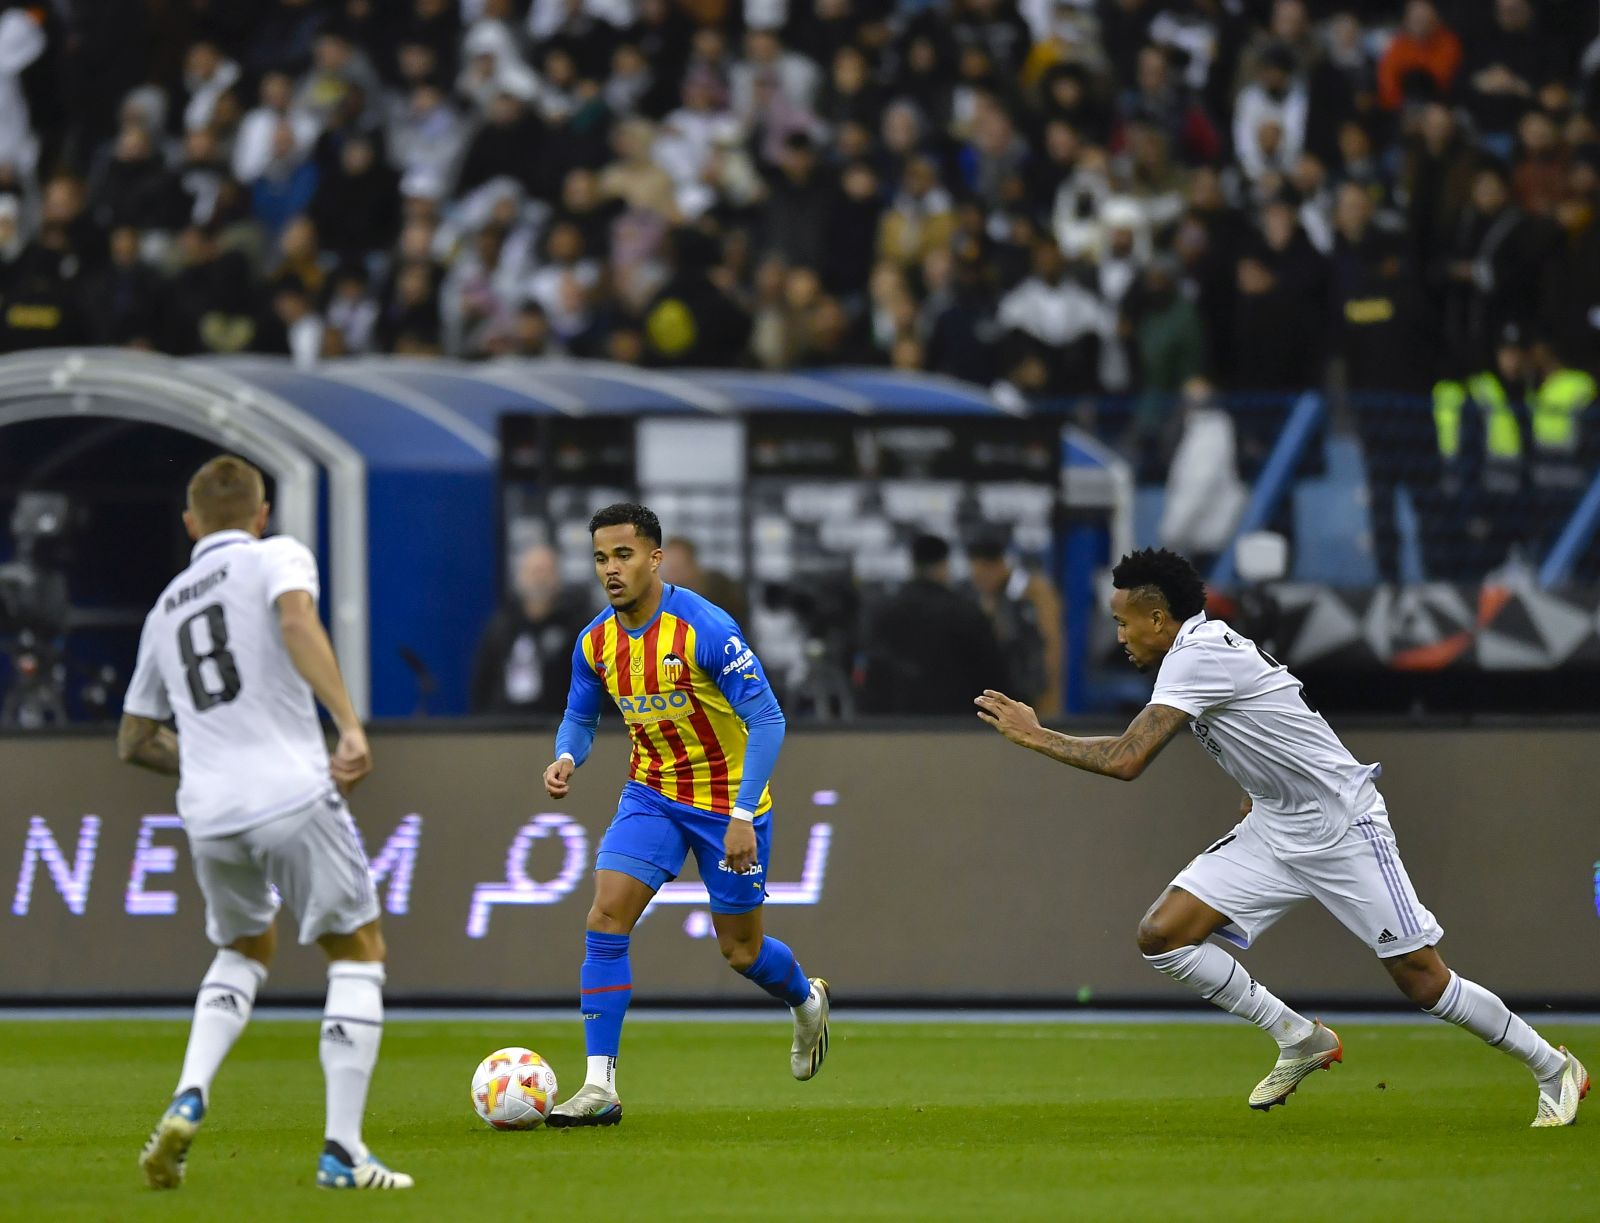 epa10400564 Valencia player Justin Dean Kluivert (C) in action against Real Madrid players Eder Militao (R) and Toni Kroos (L) during the Supercopa de Espana semi-final match between Real Madrid and Valencia, in Riyadh, Saudi Arabia, 11 January 2023.  EPA/STR